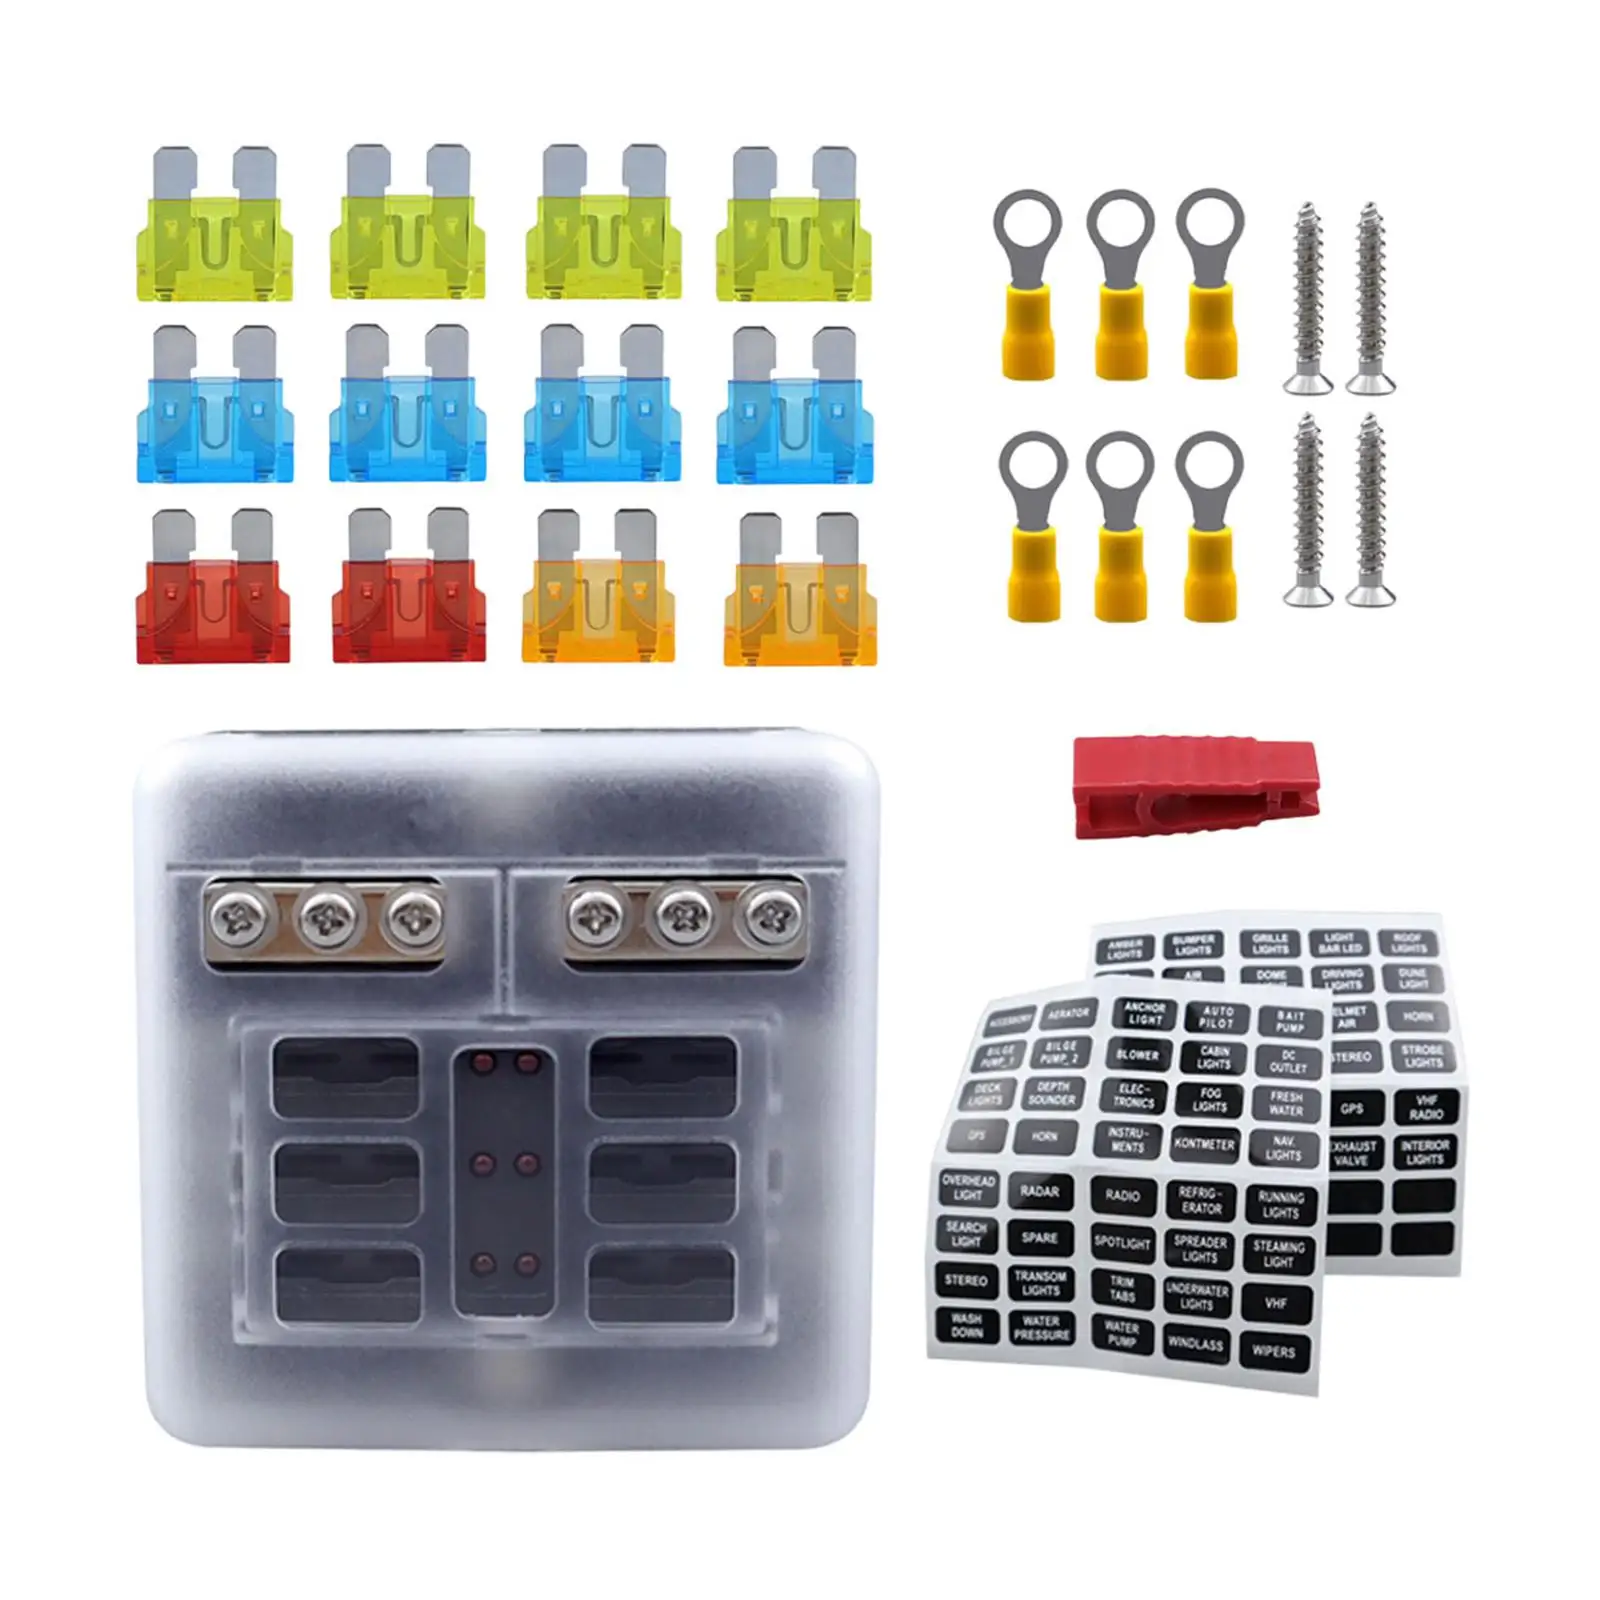 6 Way Fuse Block Multi Way Fuse Box Spare Parts Easily Install with LED